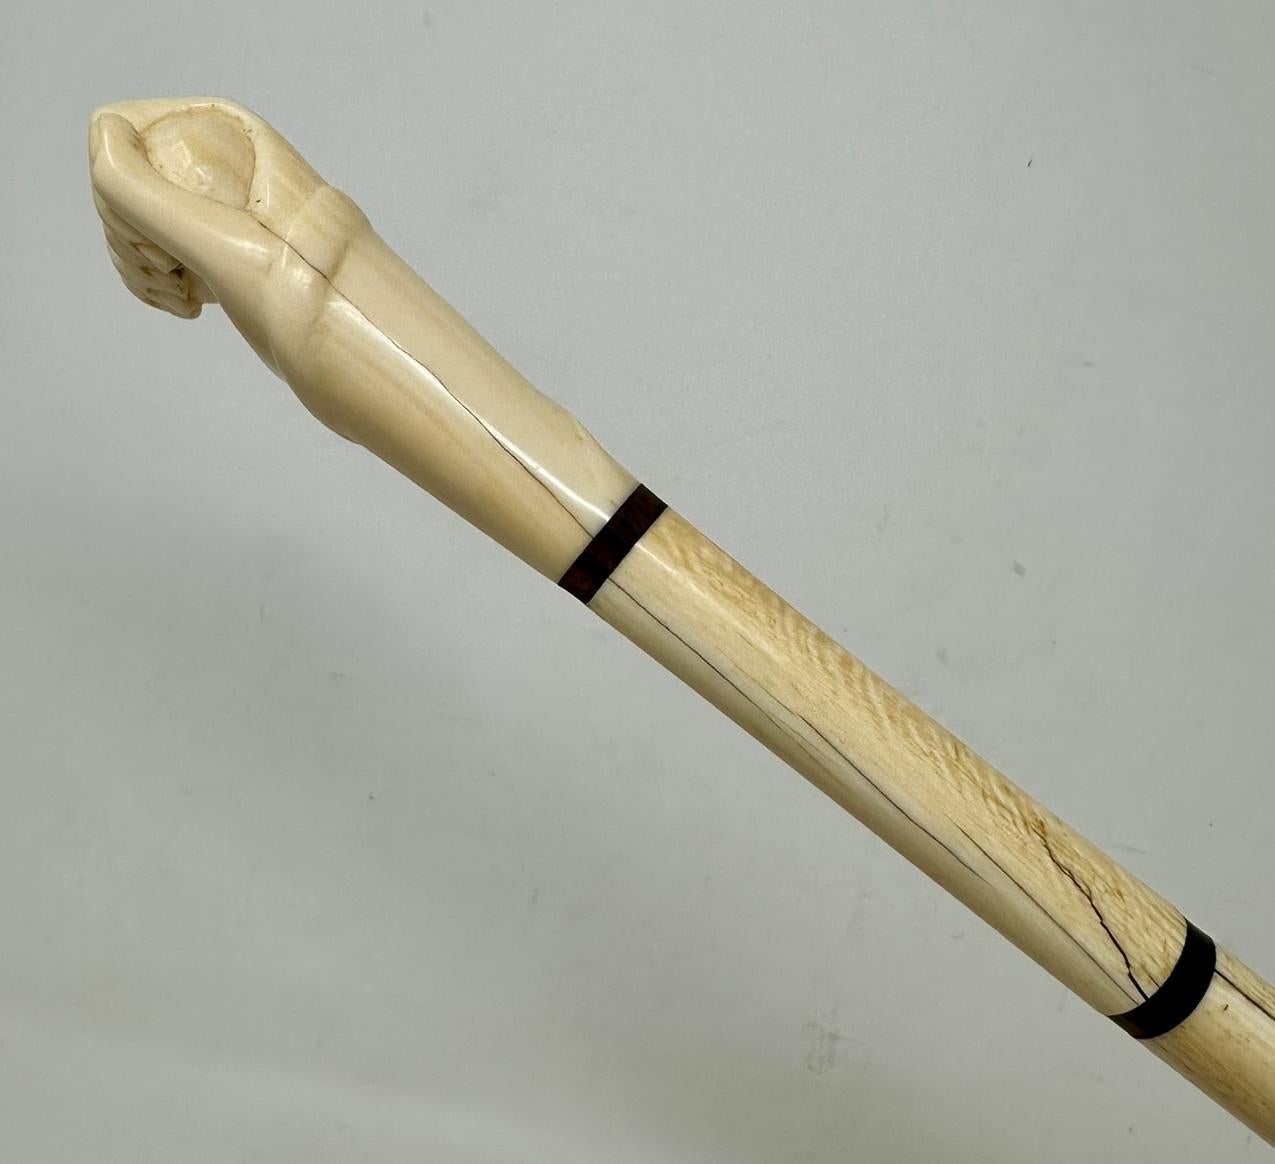 A Very Fine & Rare Example of a Mariner’s Whale Bone Walking Cane of exceptional quality. First half of the Nineteenth Century, possibly of English origin. 

The hand carved decorative grip modelled as closed fist holding a ball with a carving of a